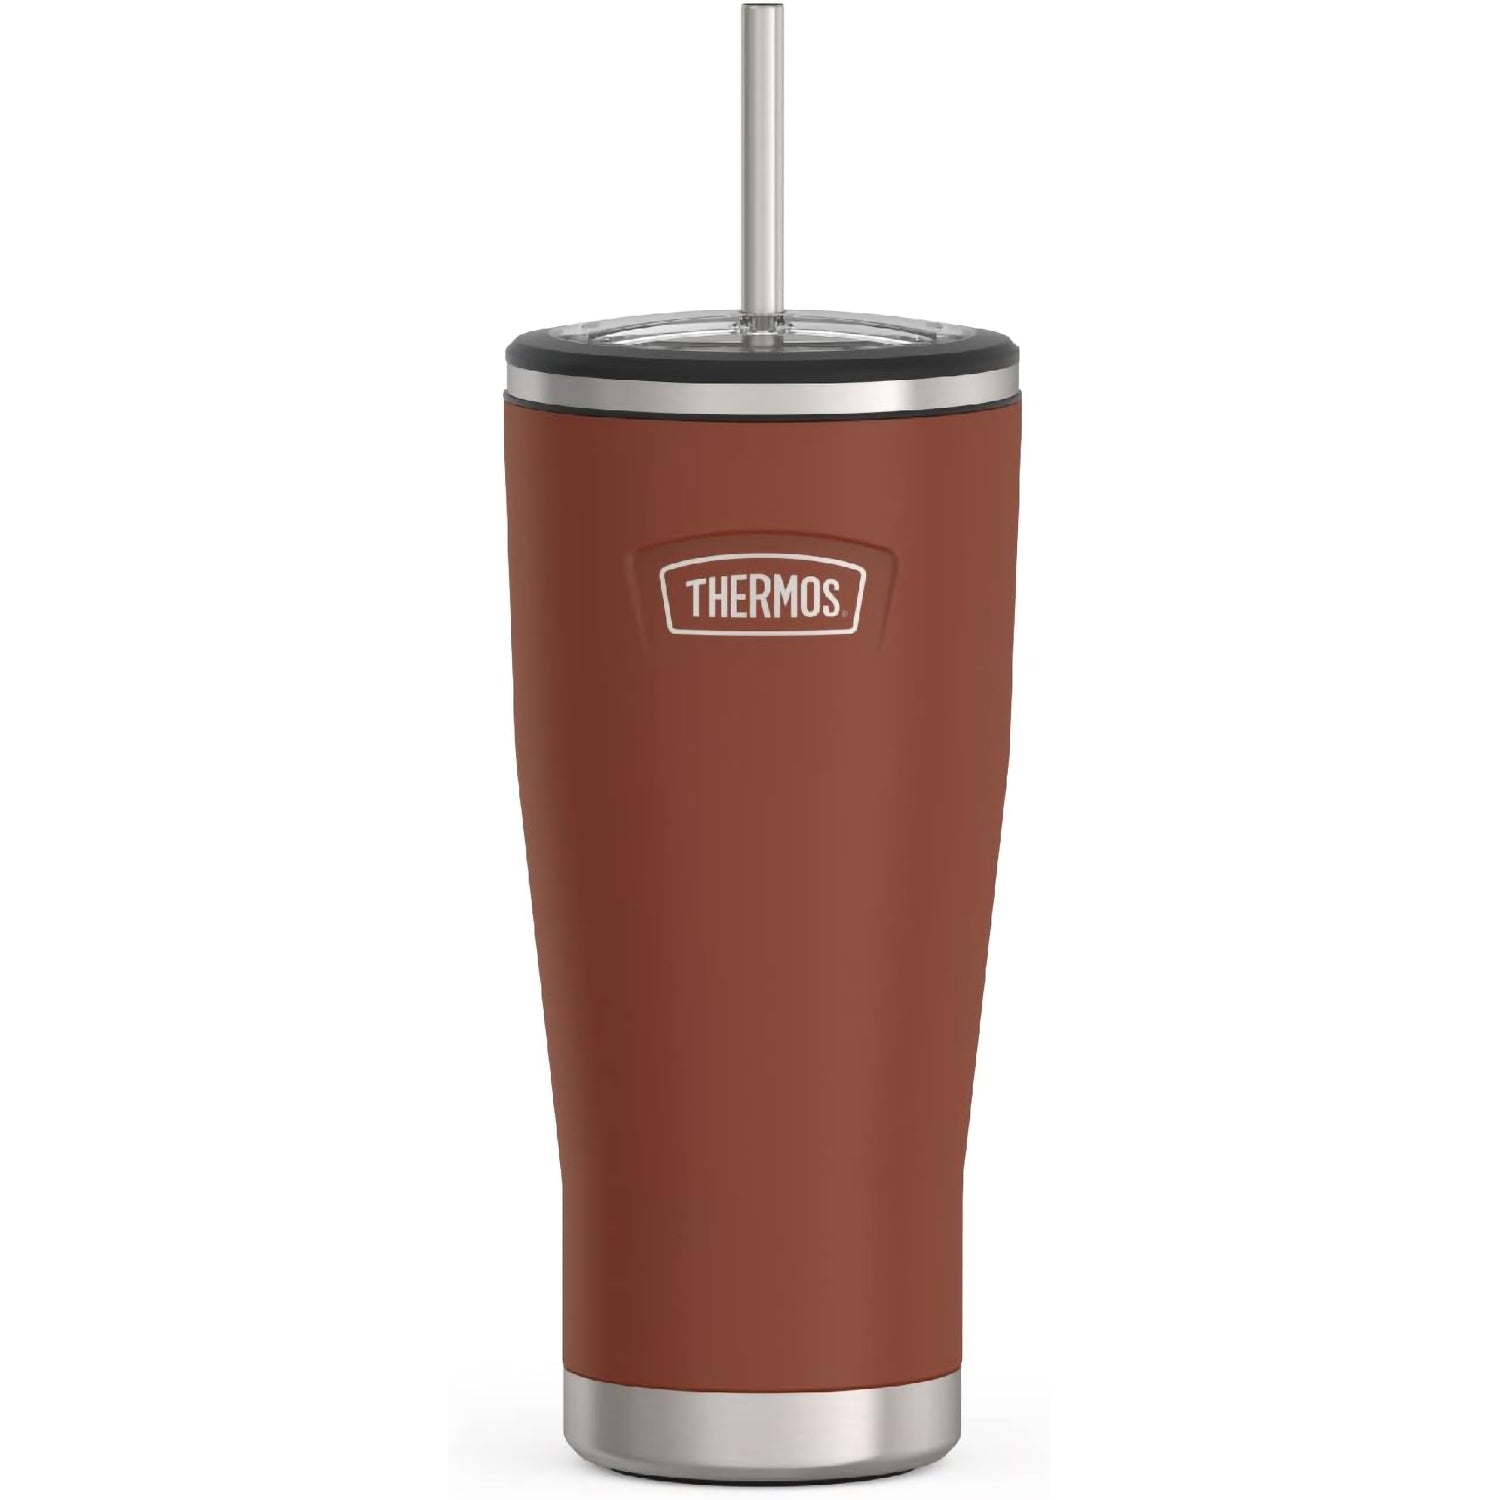 ICON Series by THERMOS Stainless Steel Cold Tumbler with Straw, 24 Ounce, Saddle